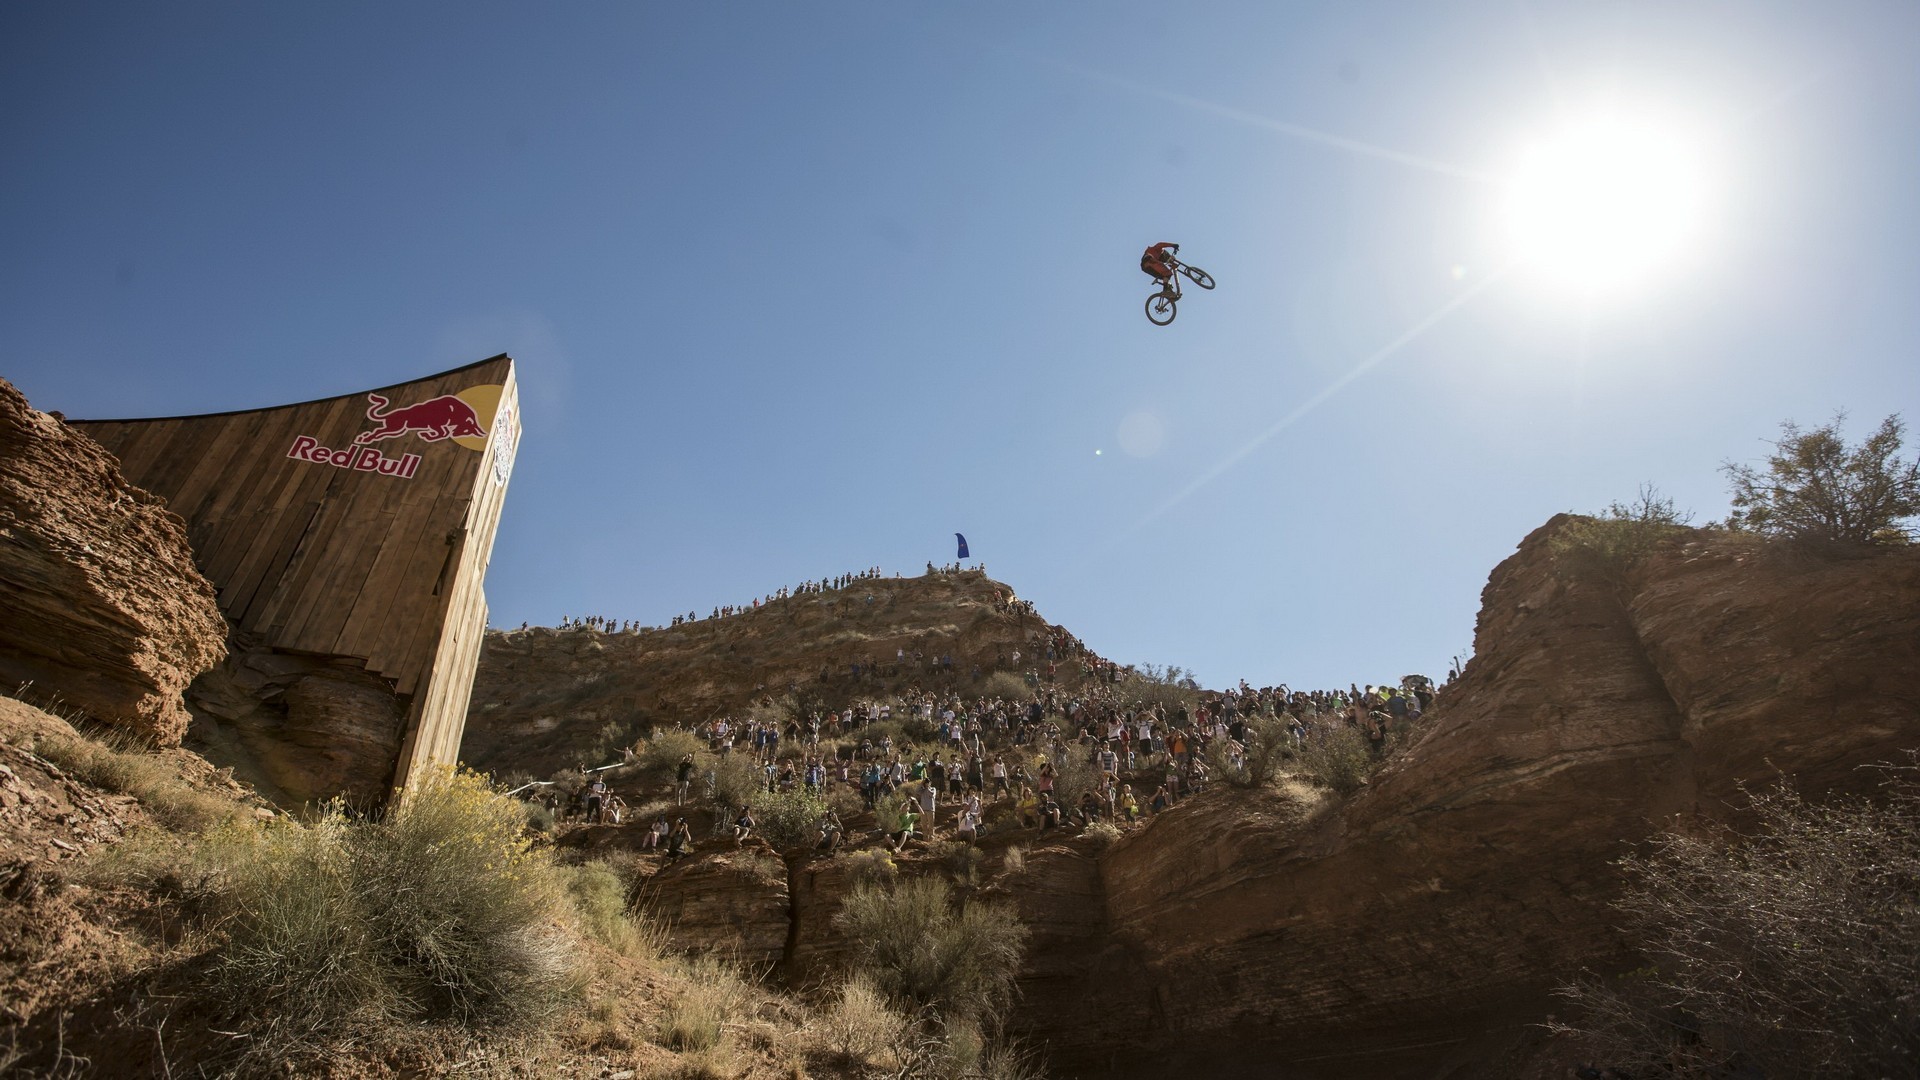 1920x1080 Bicycles sports extreme motorbikes red bull rampage wallpaper